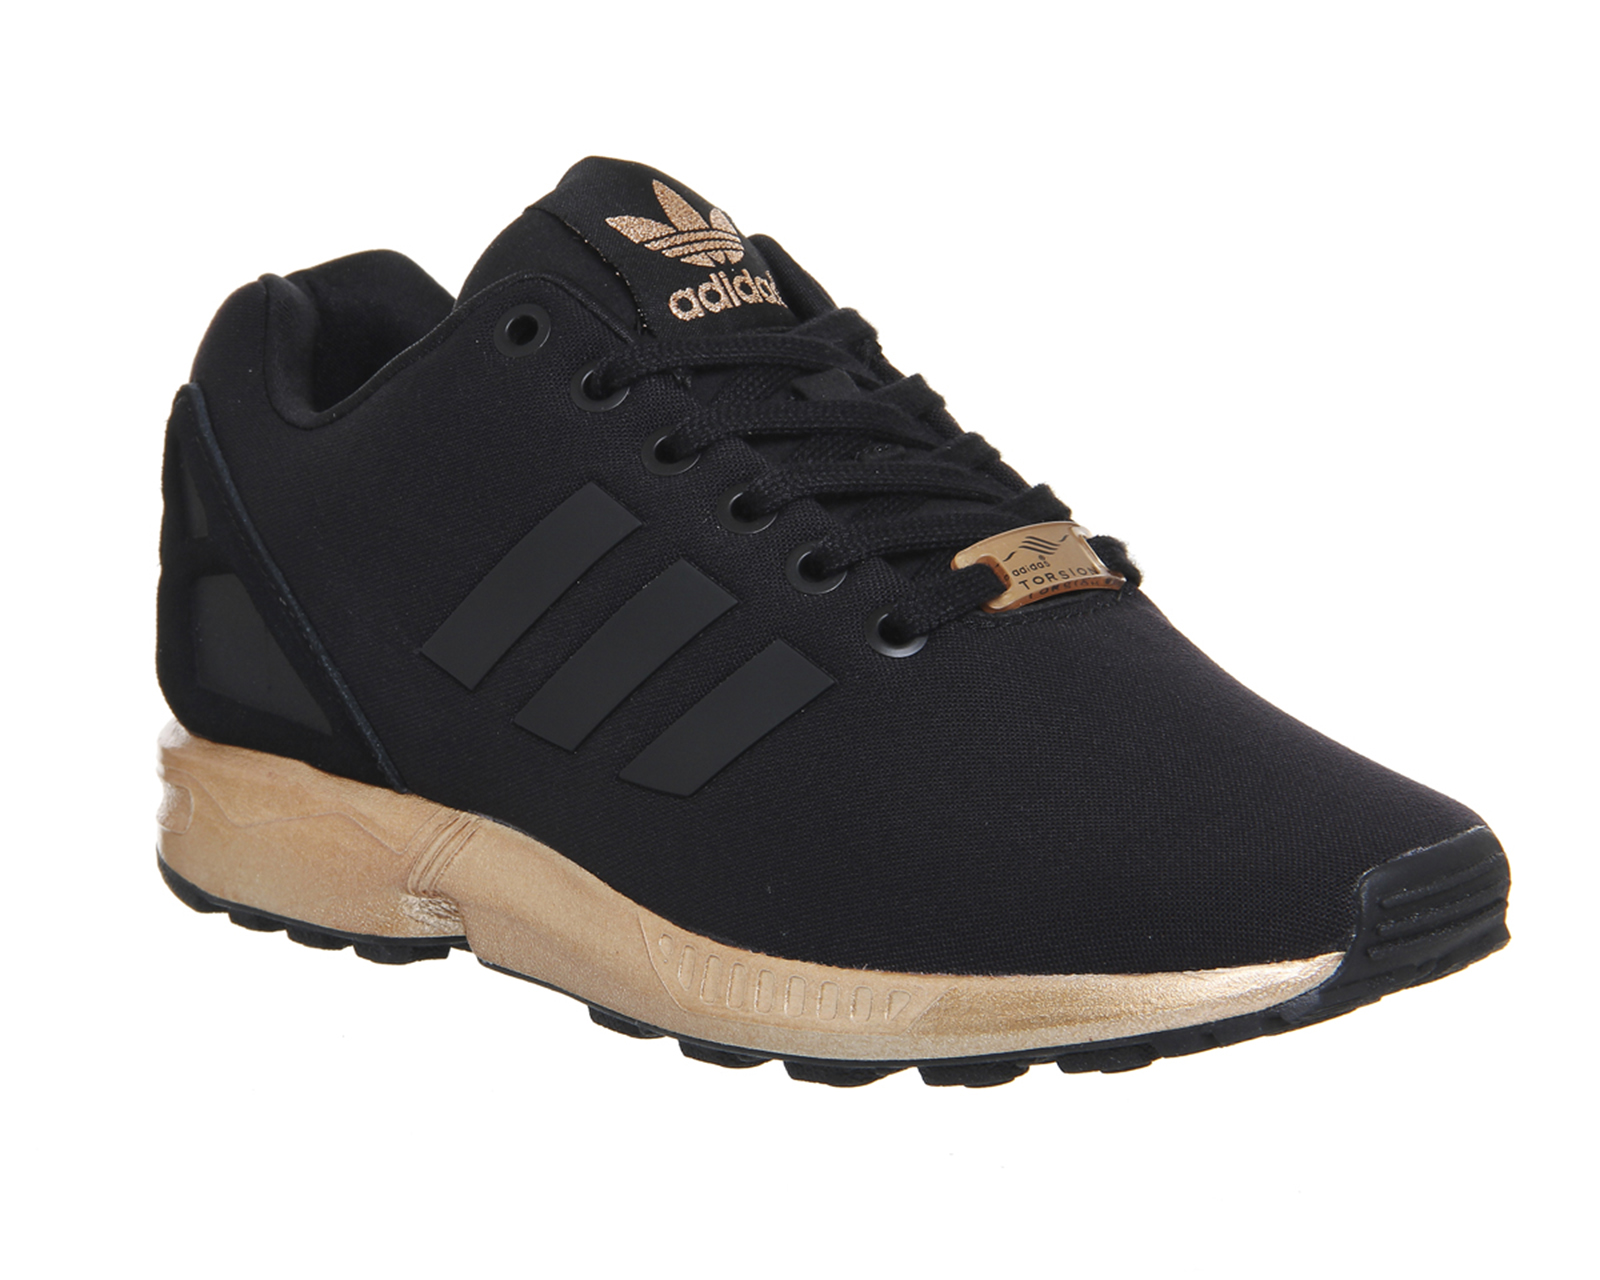 adidas zx flux black and gold Online 